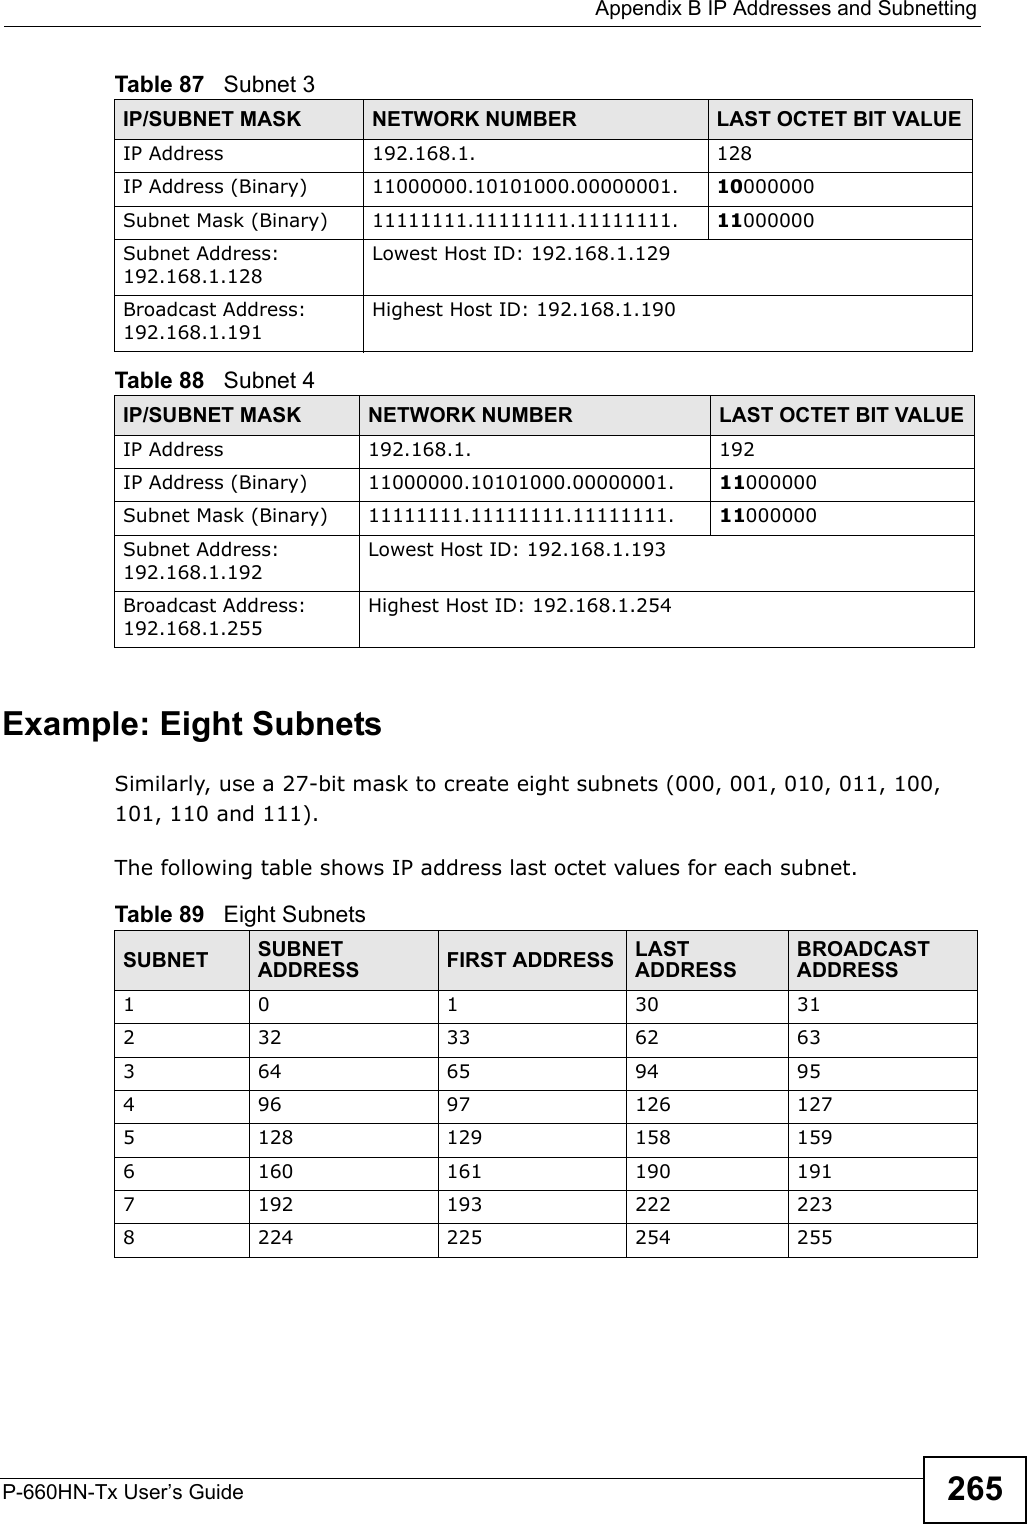  Appendix B IP Addresses and SubnettingP-660HN-Tx User’s Guide 265Example: Eight SubnetsSimilarly, use a 27-bit mask to create eight subnets (000, 001, 010, 011, 100, 101, 110 and 111). The following table shows IP address last octet values for each subnet.Table 87   Subnet 3IP/SUBNET MASK NETWORK NUMBER LAST OCTET BIT VALUEIP Address 192.168.1. 128IP Address (Binary) 11000000.10101000.00000001. 10000000Subnet Mask (Binary) 11111111.11111111.11111111. 11000000Subnet Address: 192.168.1.128Lowest Host ID: 192.168.1.129Broadcast Address: 192.168.1.191Highest Host ID: 192.168.1.190Table 88   Subnet 4IP/SUBNET MASK NETWORK NUMBER LAST OCTET BIT VALUEIP Address 192.168.1. 192IP Address (Binary) 11000000.10101000.00000001. 11000000Subnet Mask (Binary) 11111111.11111111.11111111. 11000000Subnet Address: 192.168.1.192Lowest Host ID: 192.168.1.193Broadcast Address: 192.168.1.255Highest Host ID: 192.168.1.254Table 89   Eight SubnetsSUBNET SUBNET ADDRESS FIRST ADDRESS LAST ADDRESSBROADCAST ADDRESS1 0 1 30 31232 33 62 63364 65 94 95496 97 126 1275128 129 158 1596160 161 190 1917192 193 222 2238224 225 254 255